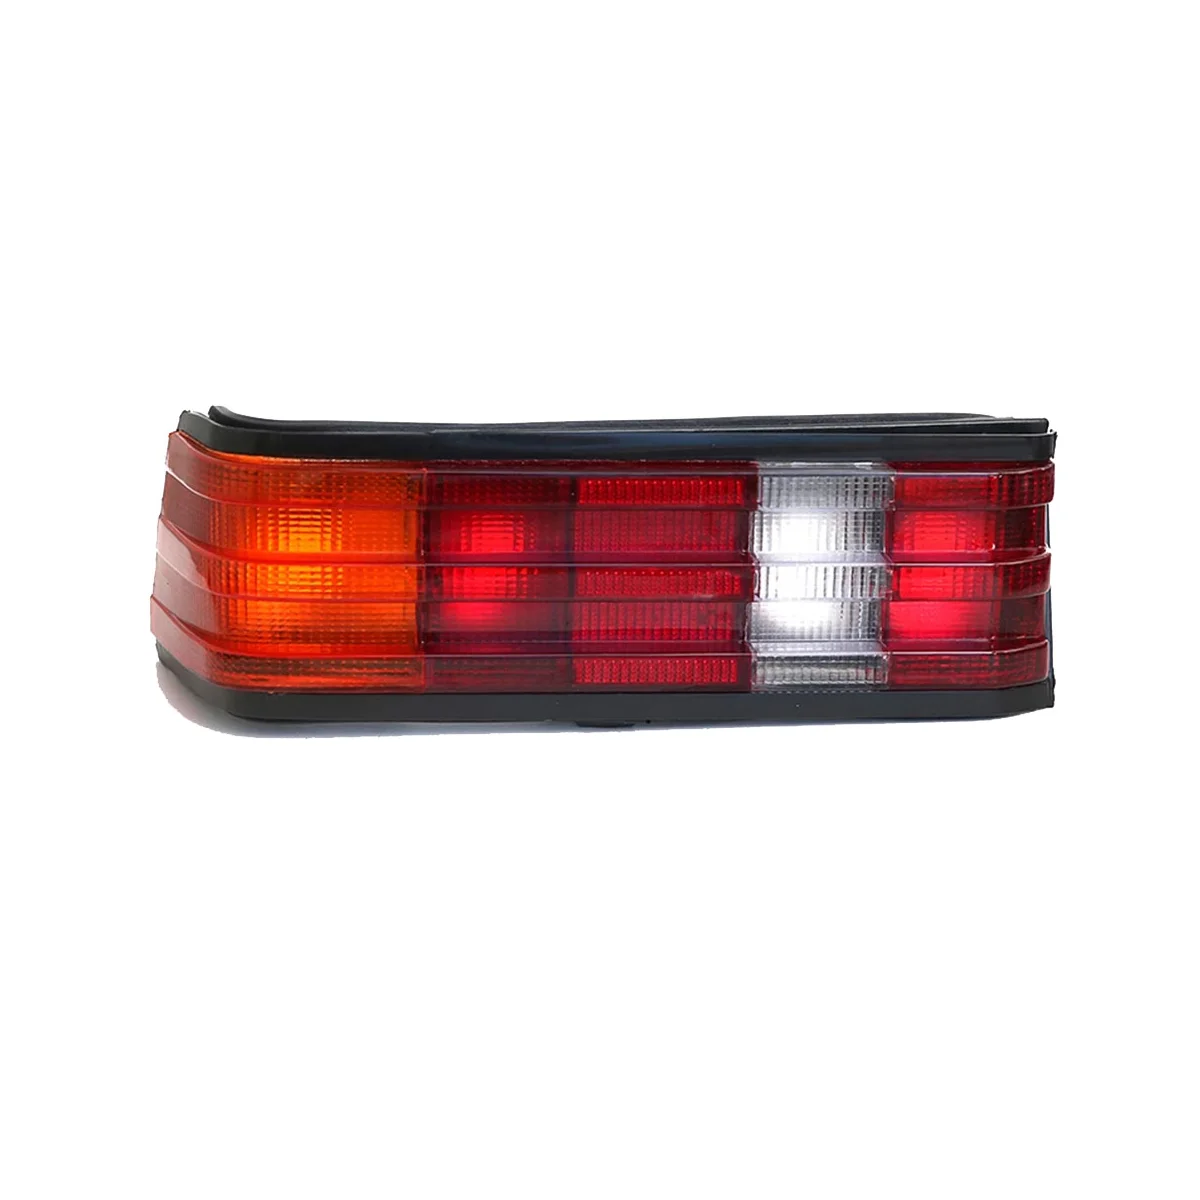 

Left Rear Tail Light Stop Brake Lamp Signal Lighting for Mercedes Benz 190 W201 190E 1982-1993 Car Tailligh Without Bulb